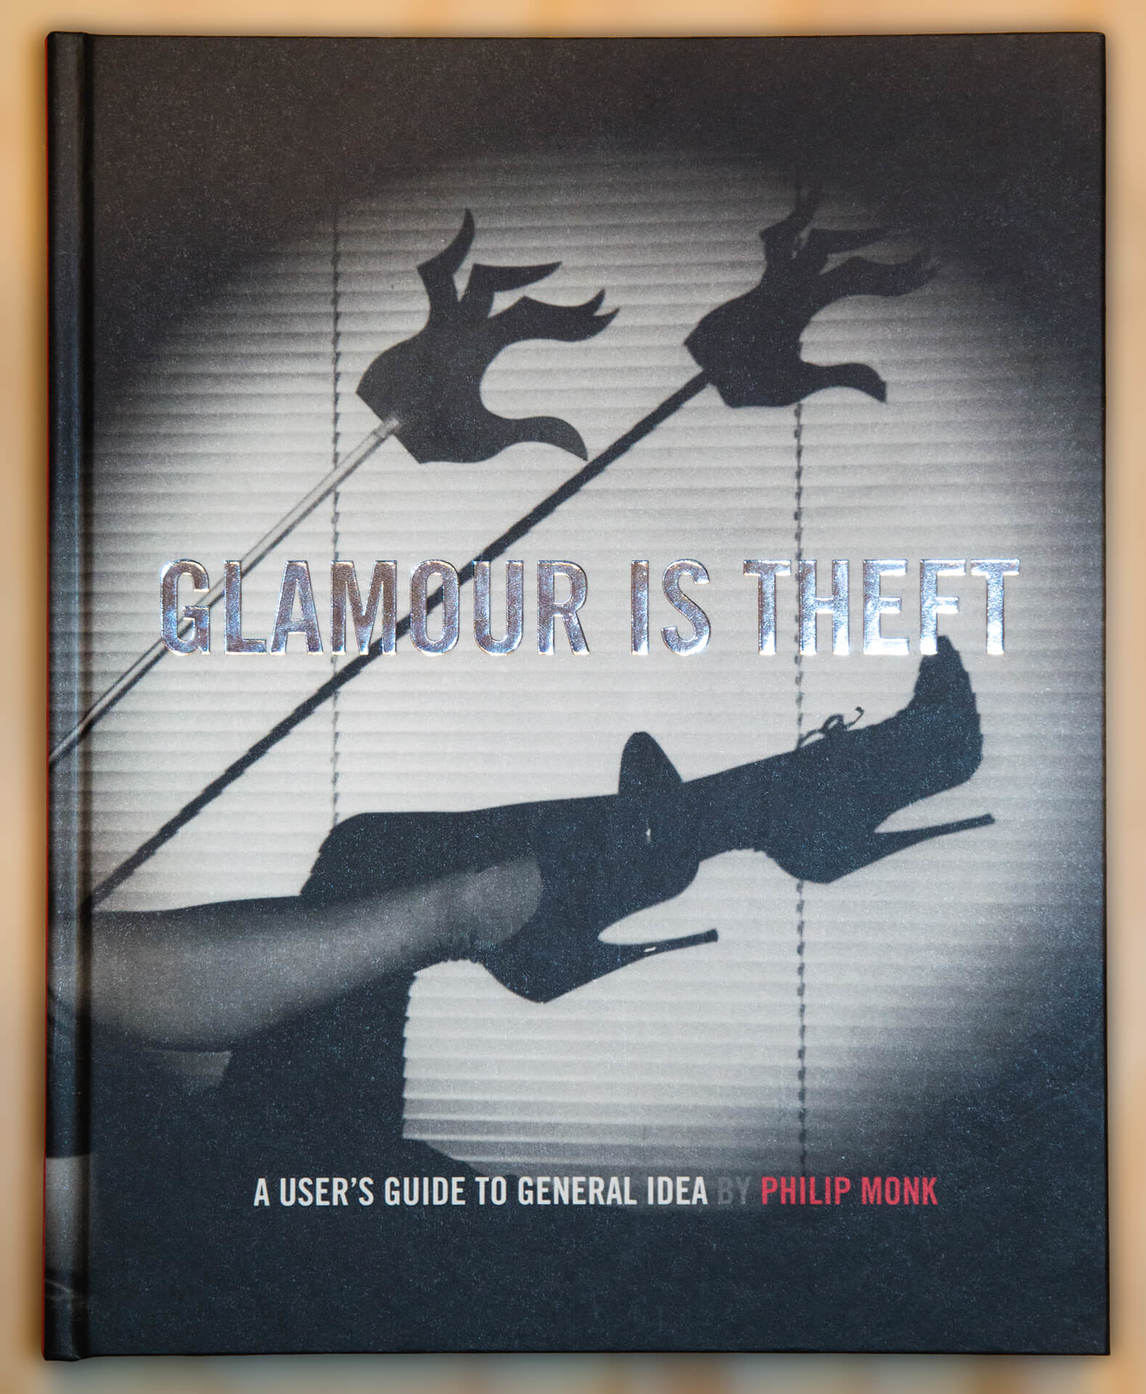 Art Canada Institute, General Idea, Glamour is Theft: A User’s Guide to General Idea by Philip Monk. (Toronto: Art Gallery of York University, 2012)